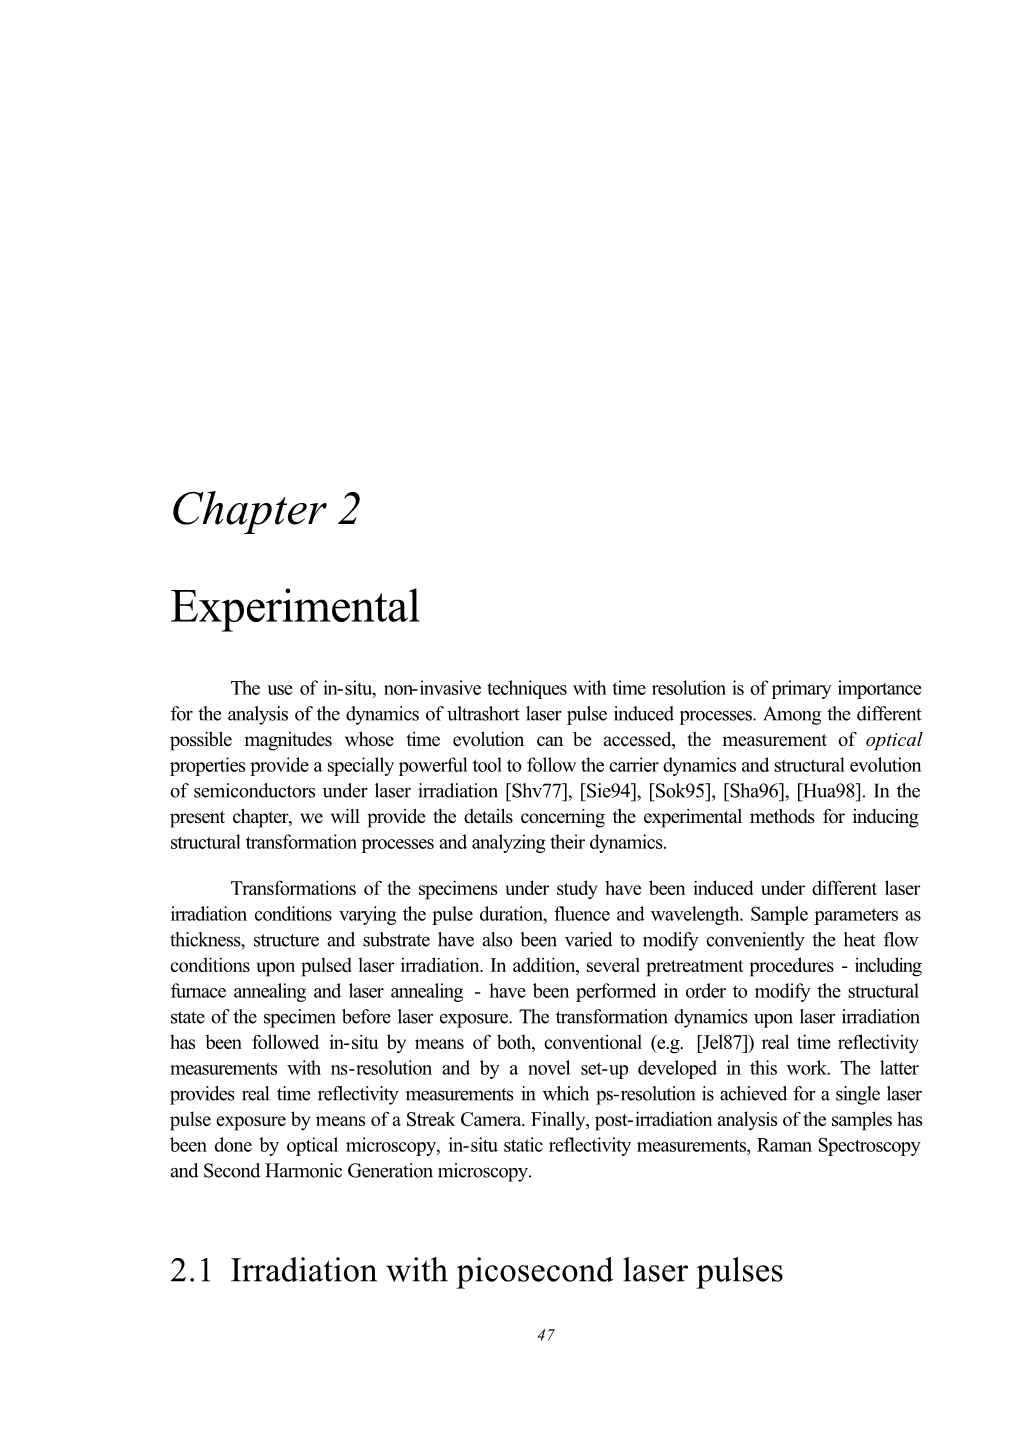 Chapter 2 Experimental